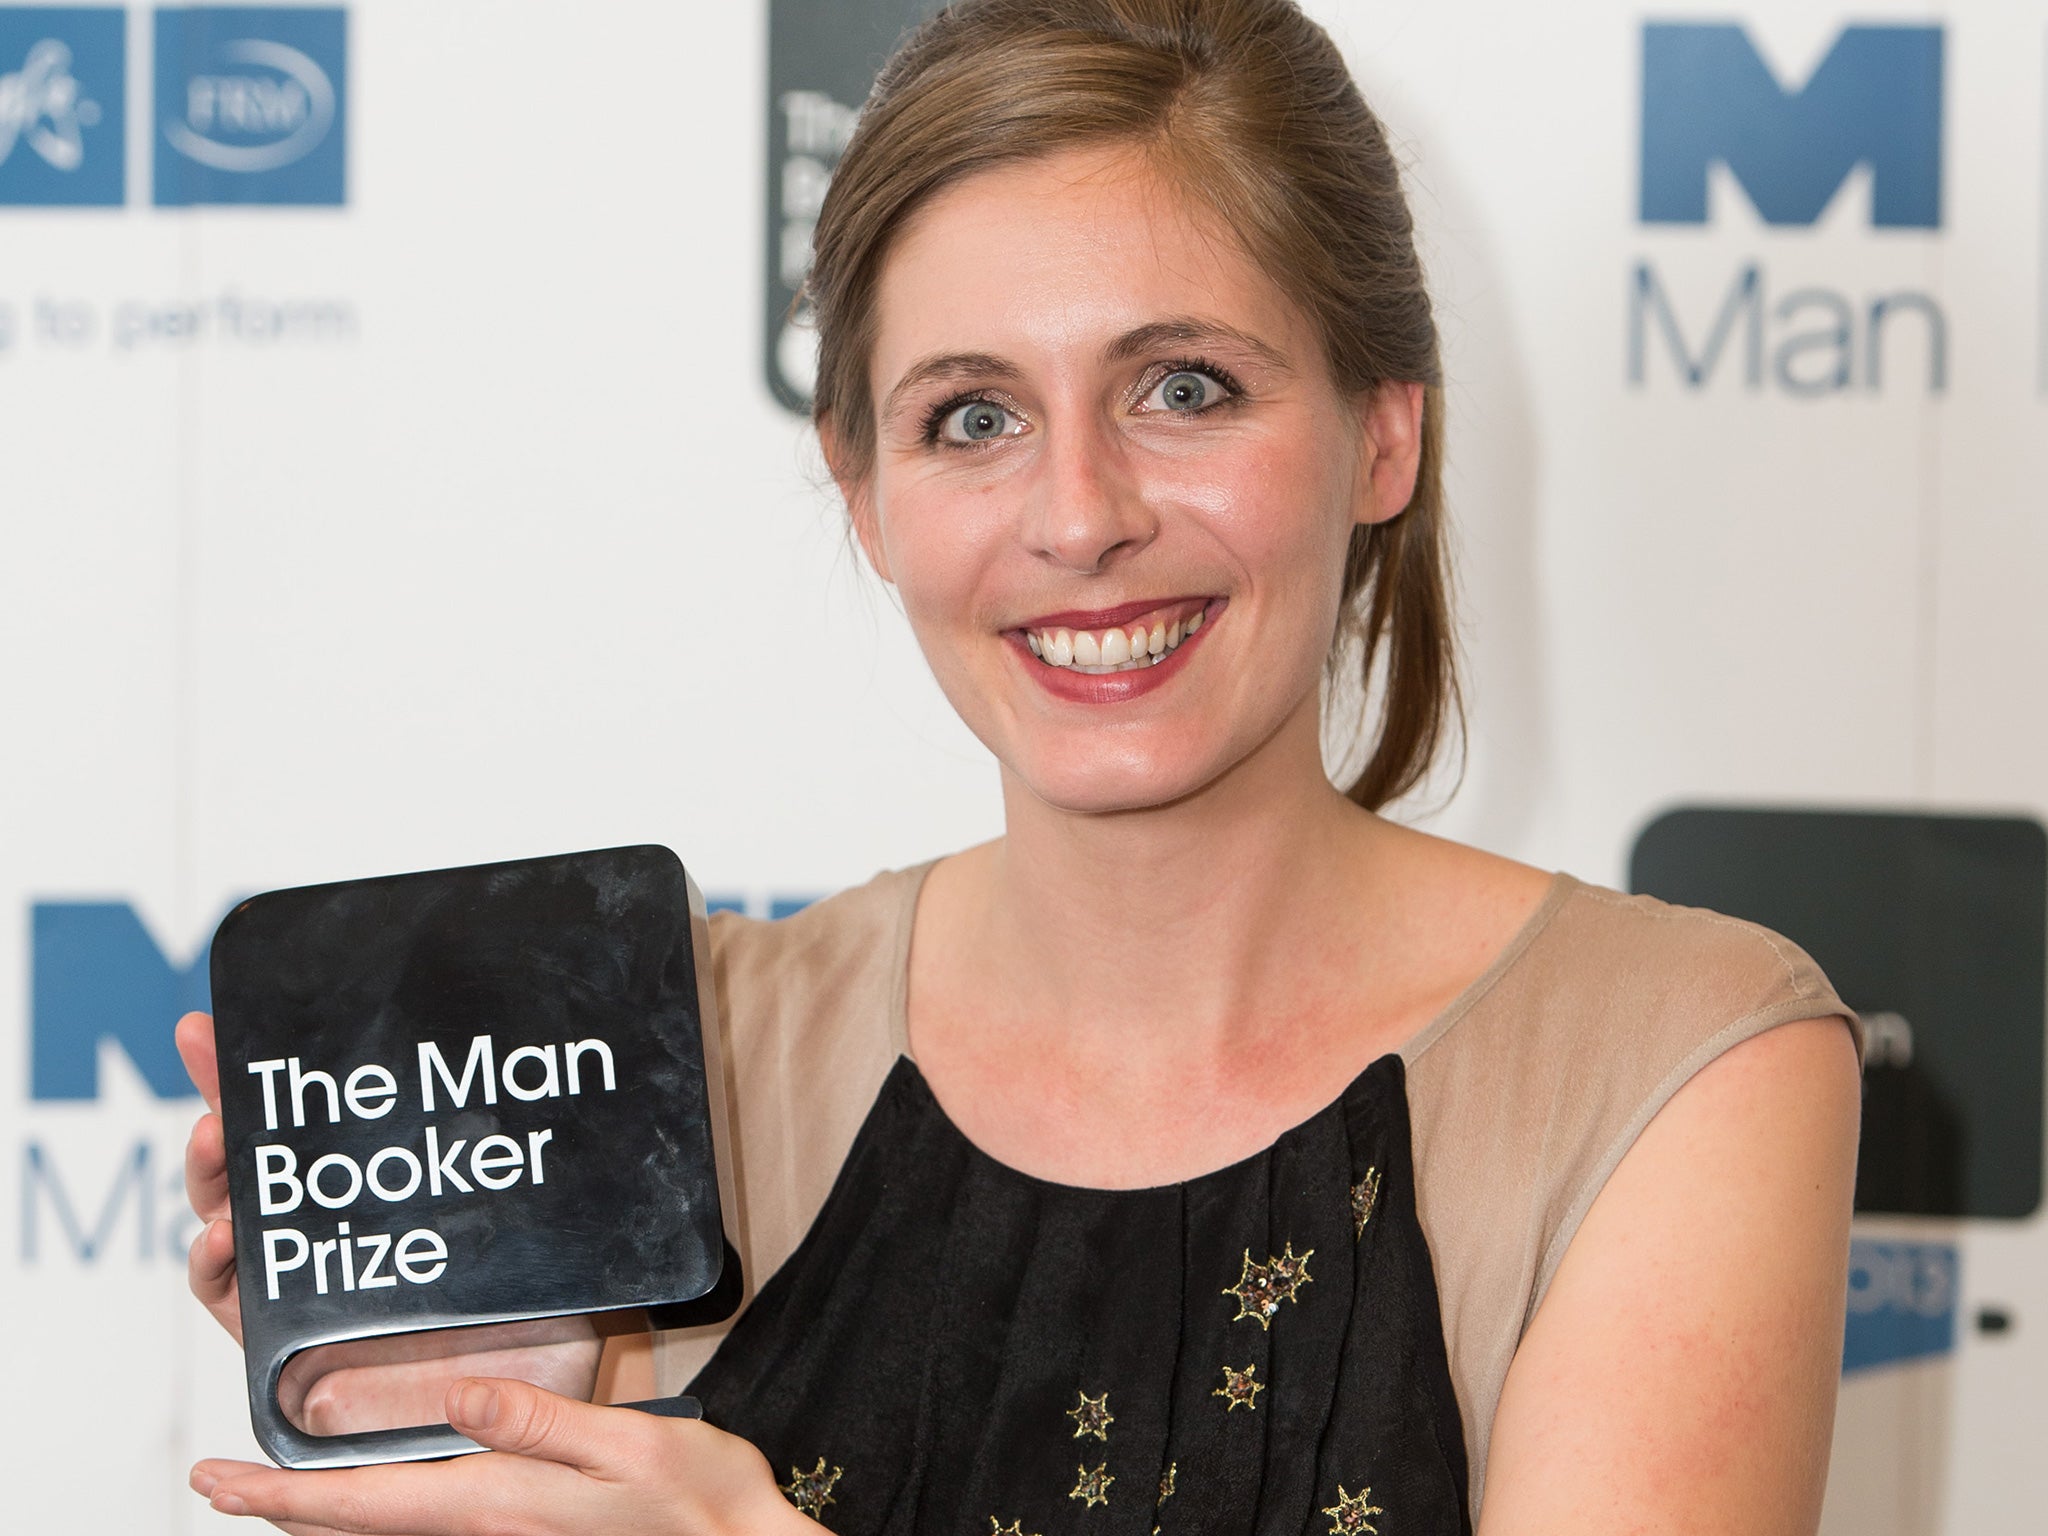 Eleanor Catton has hit back after being accused of 'treachery' for criticising the government.